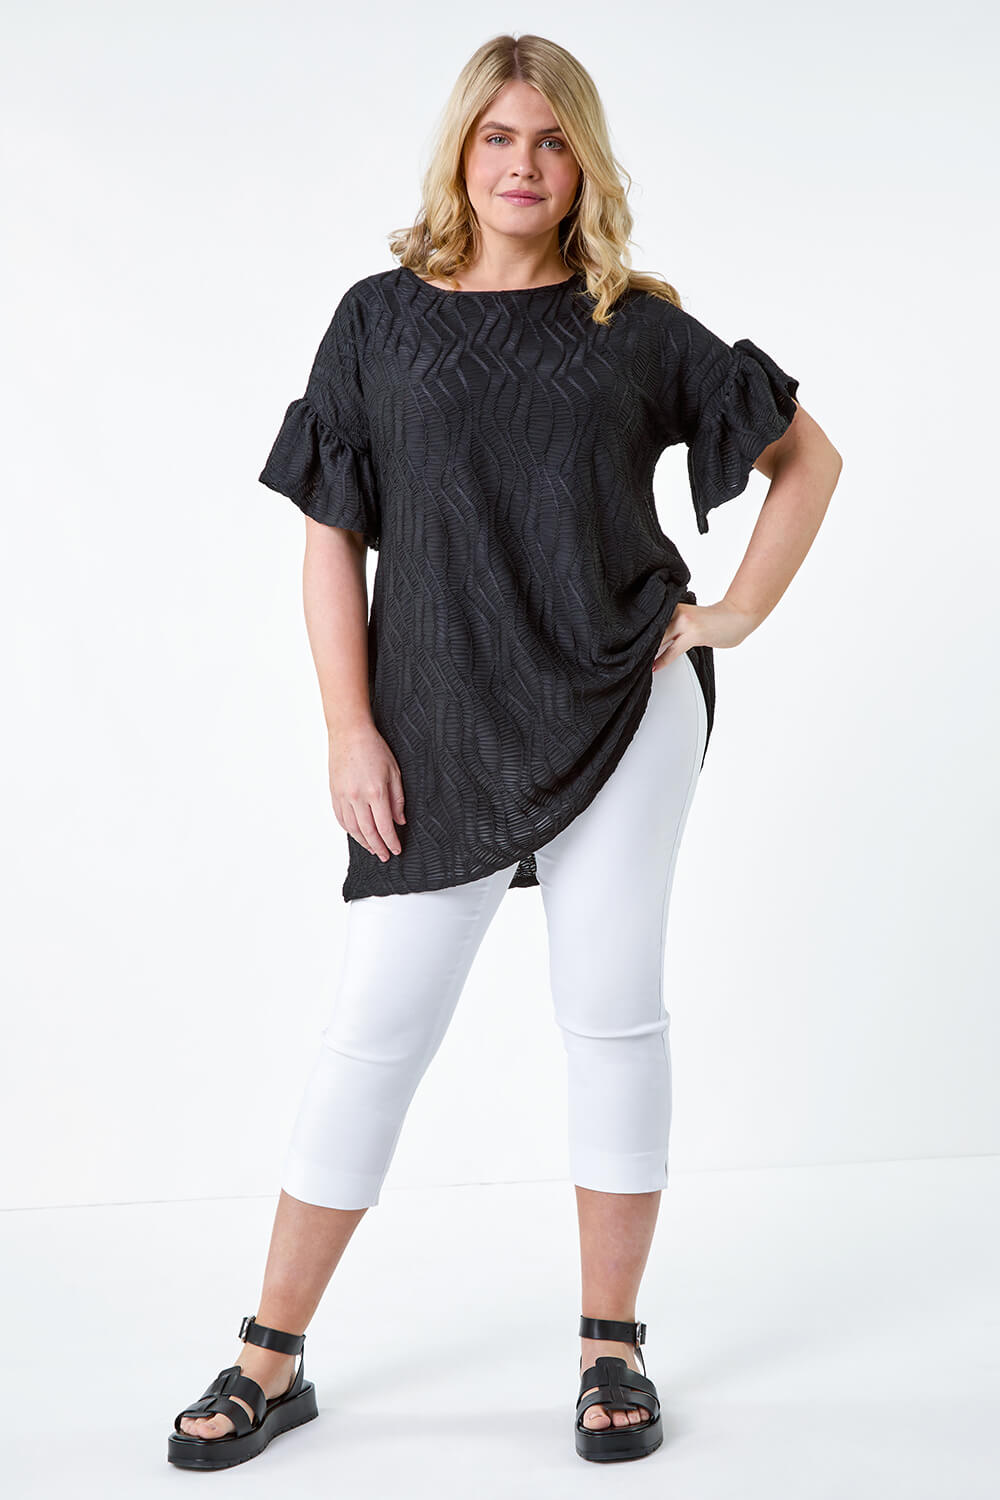 Black Curve Textured Frill Detail Stretch T-Shirt, Image 2 of 5